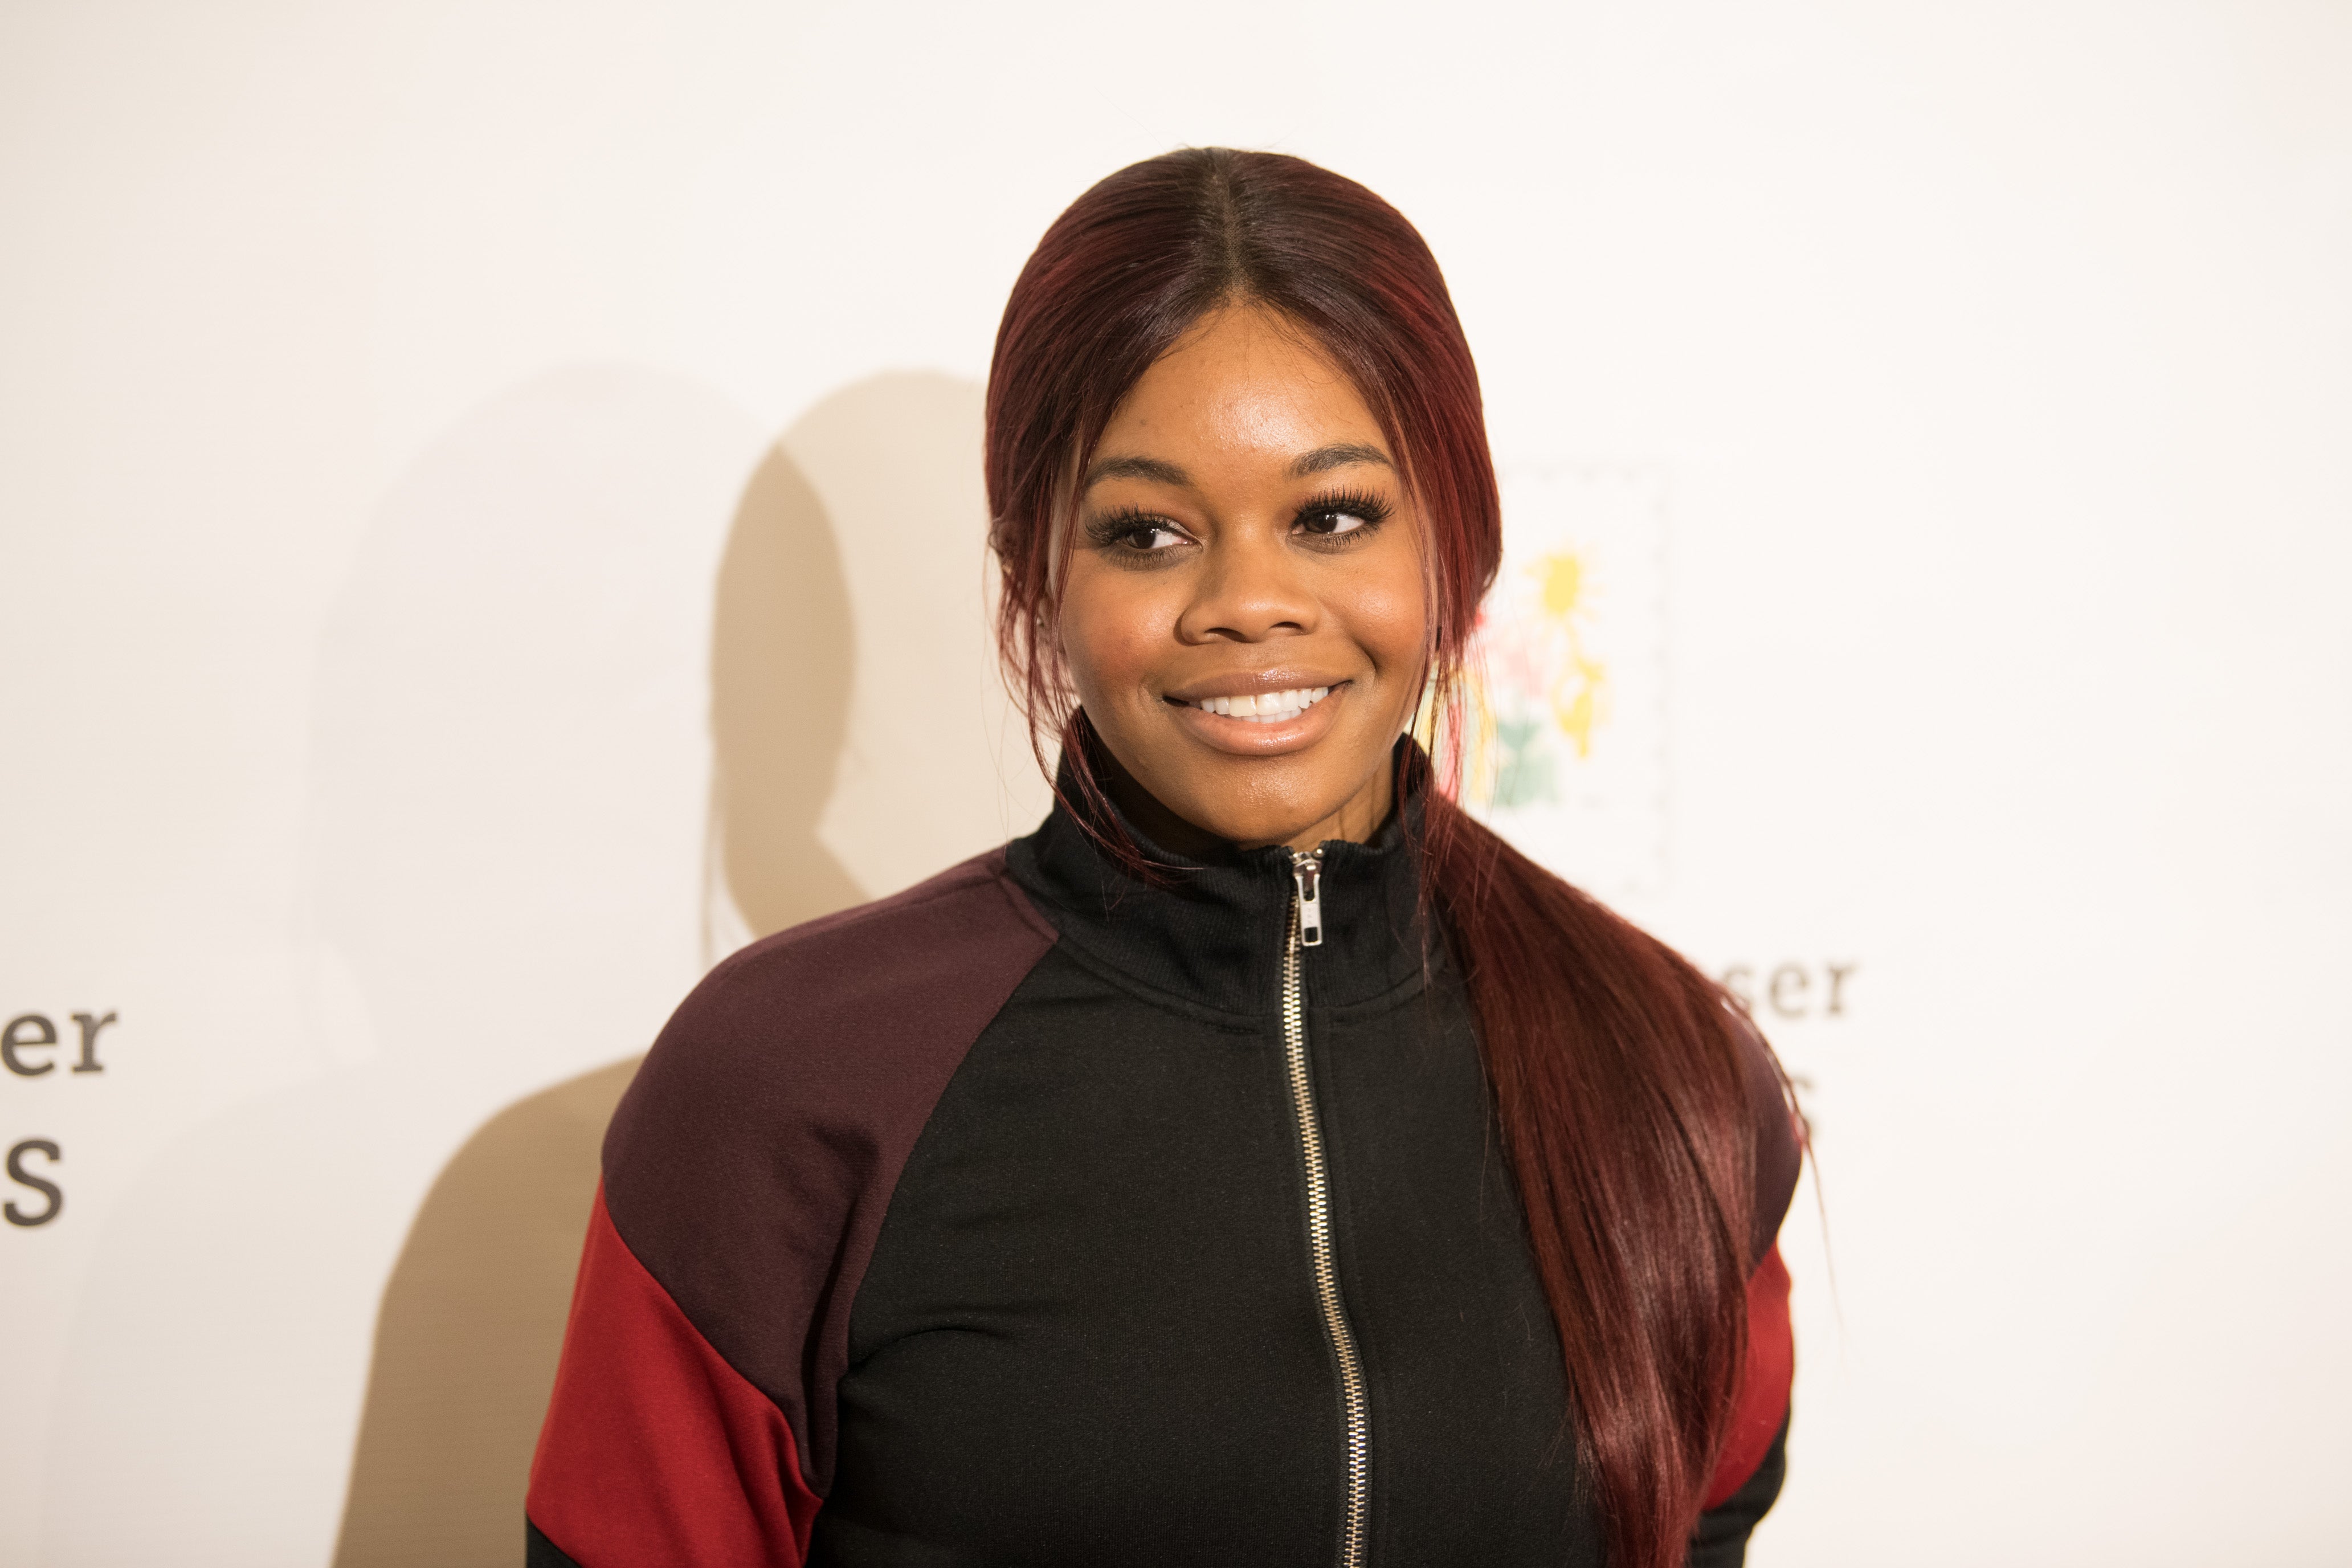 Gabby Douglas Apologizes for Saying Women Should Dress 'Modestly' in Response to Post About Sexual Assault
